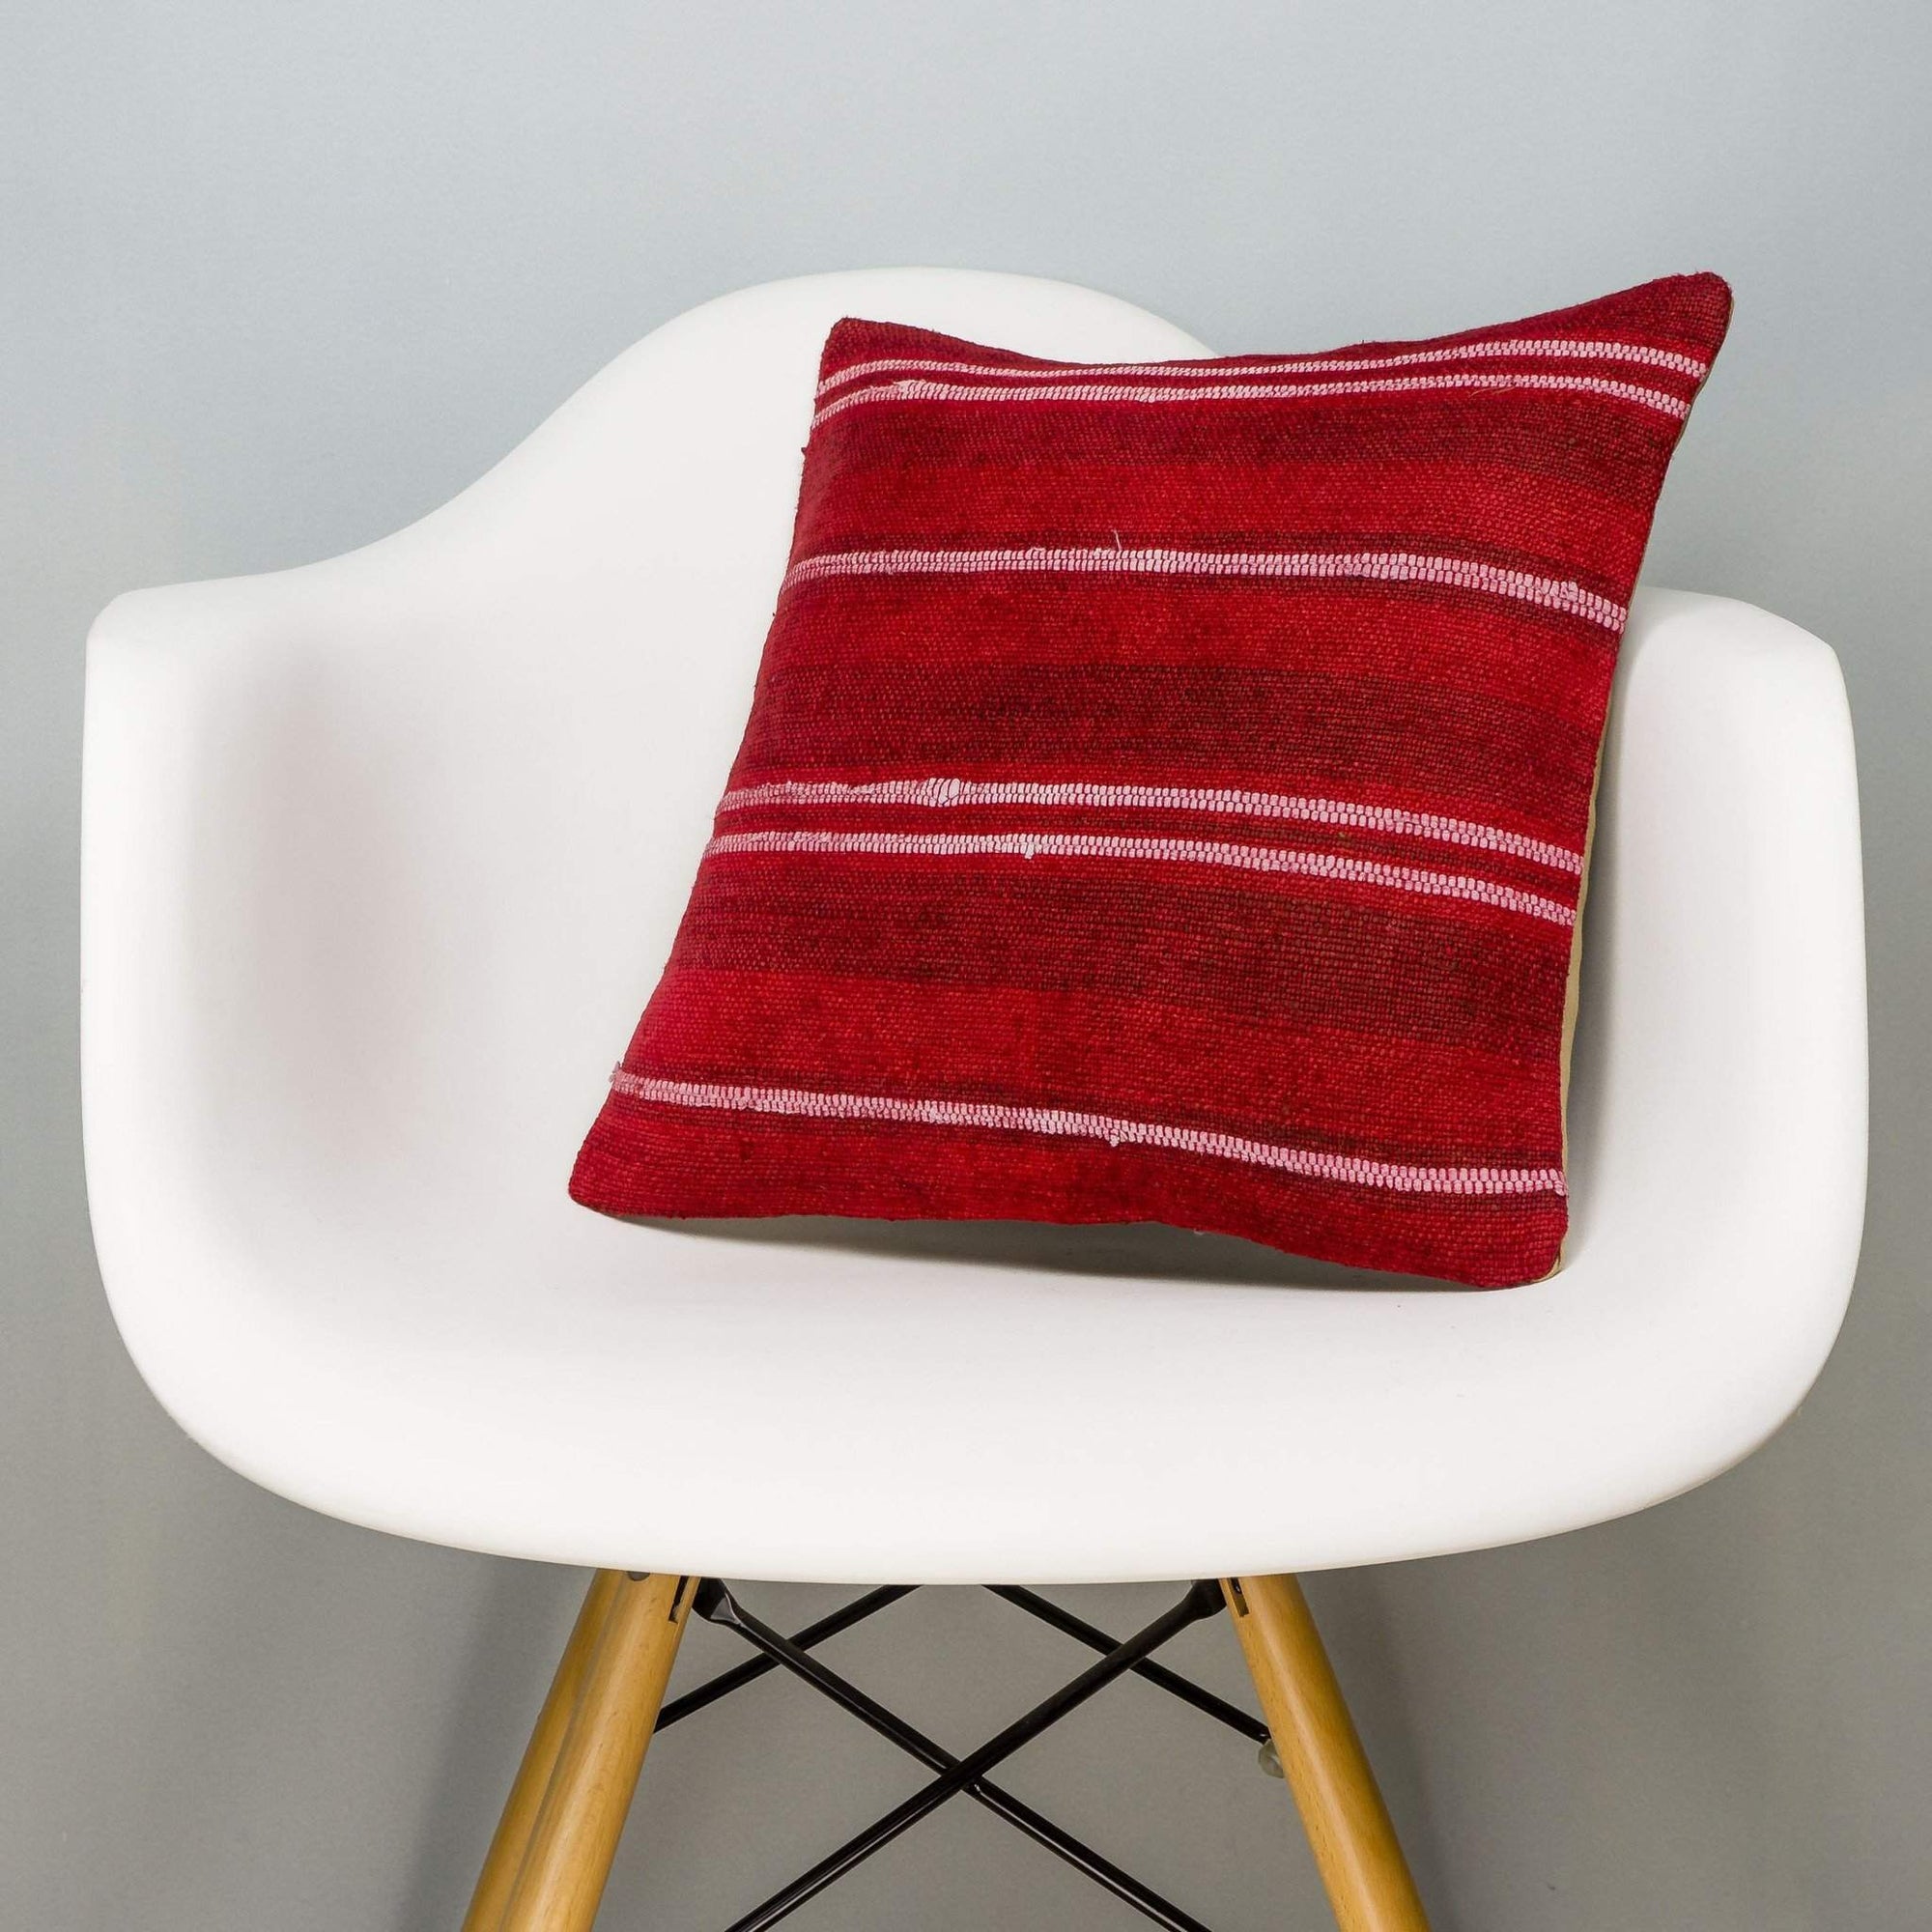 Striped Red Kilim Pillow Cover 16x16 2866 - kilimpillowstore
 - 1